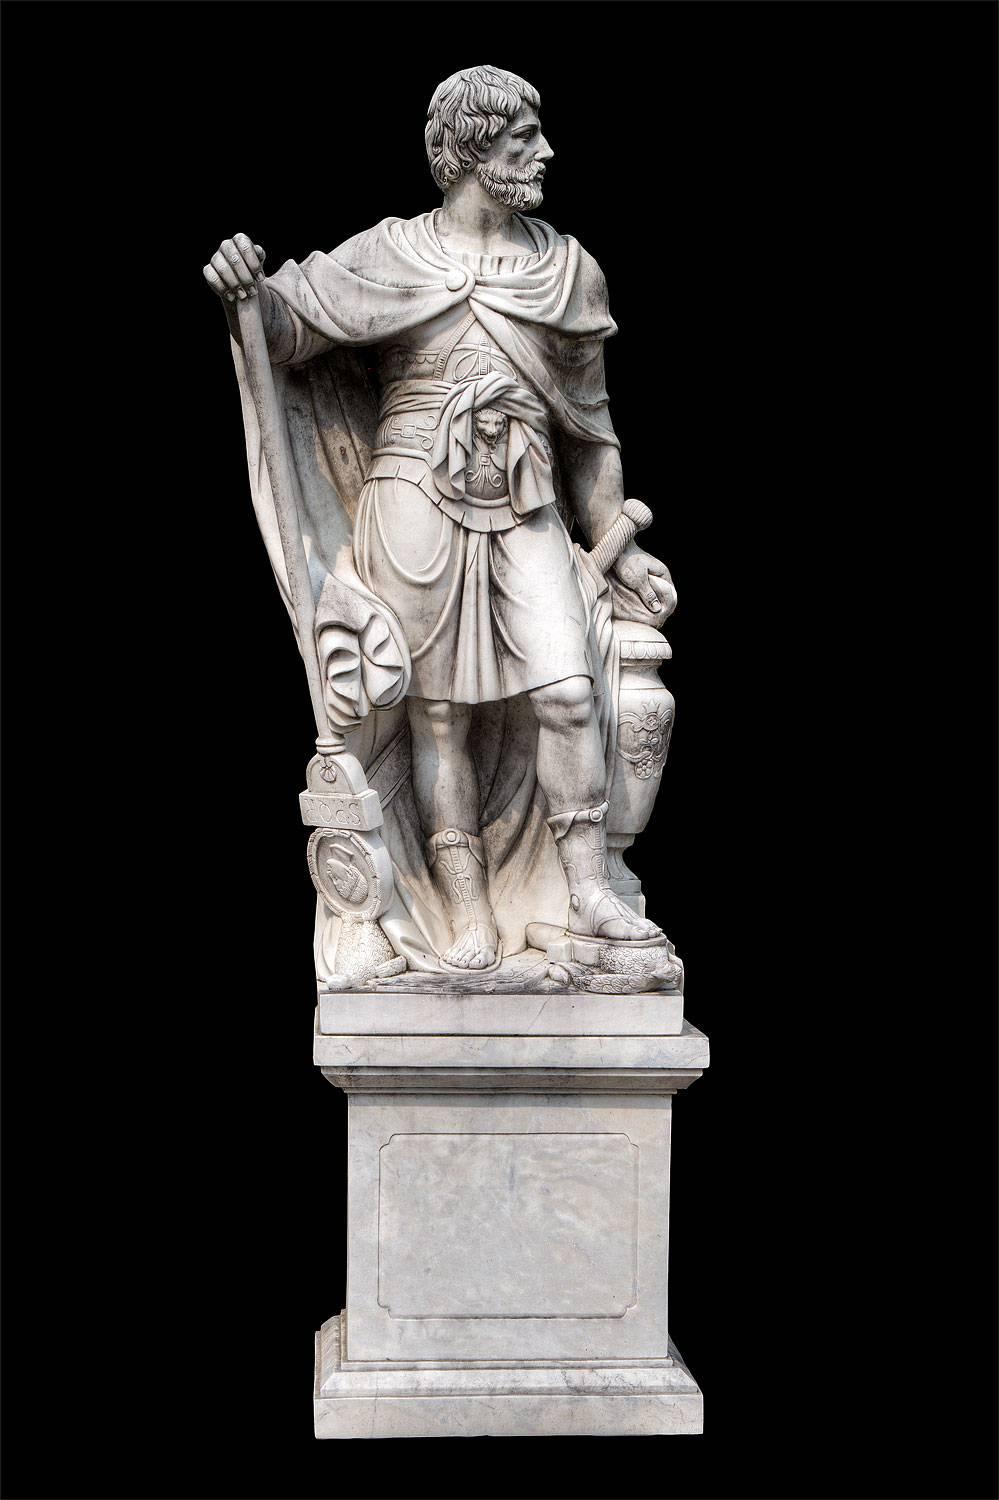 Standing figure of Julius Caesar wearing a Tunic and holding a billowing drapery with a composition marble square-section pedestal.
Base:
H 85 cm, lxp=80x65 cm
 Sculpture H=200 cm

Total height
H=285 cm.